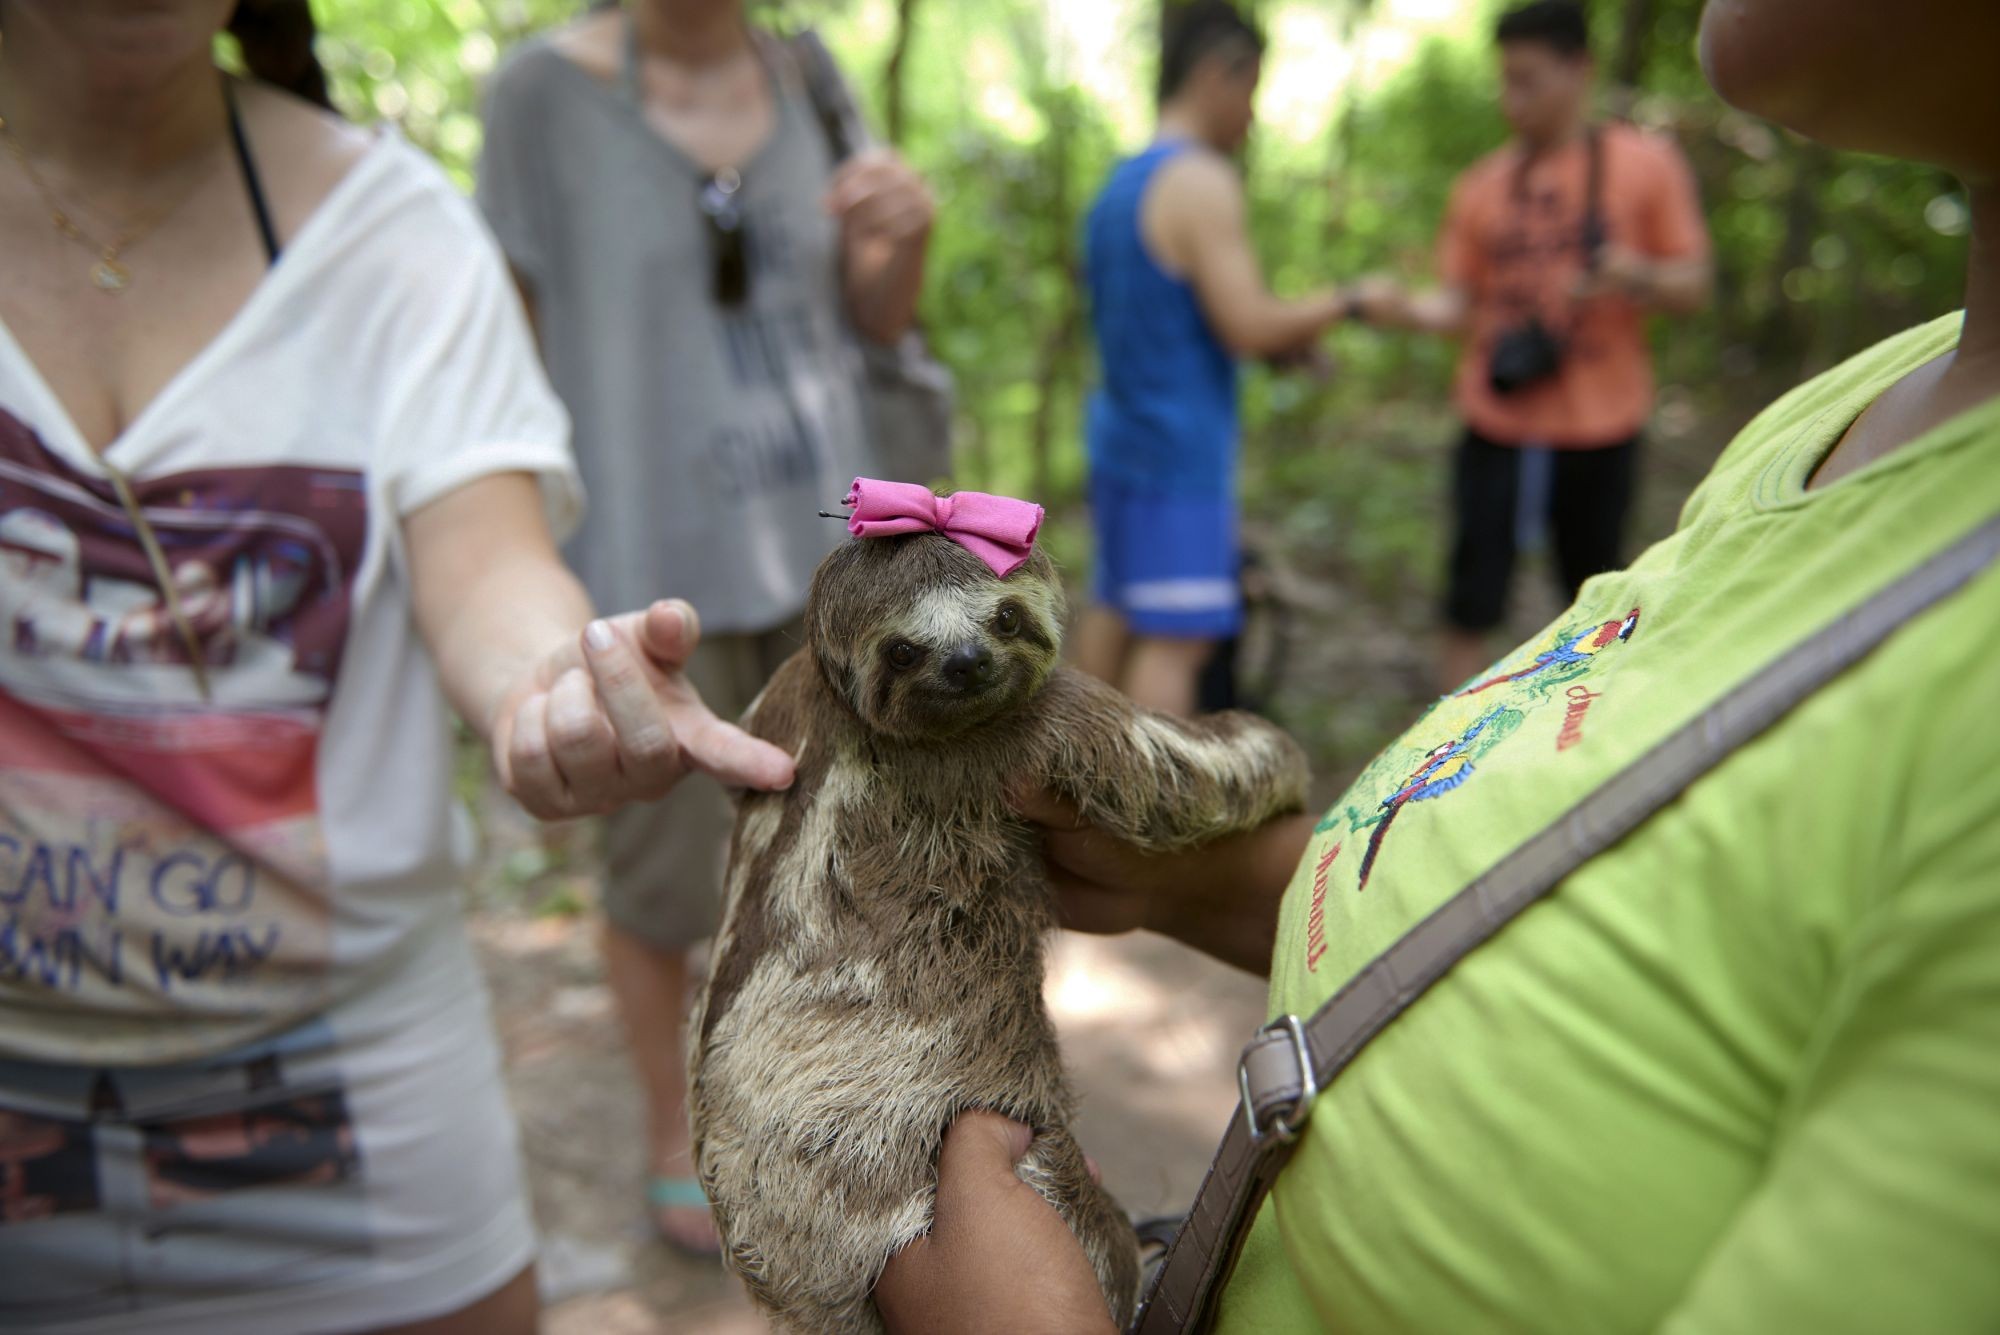 Local sloths are taken from the wild and used for harmful selfies with tourists, in Manaus, Brazil